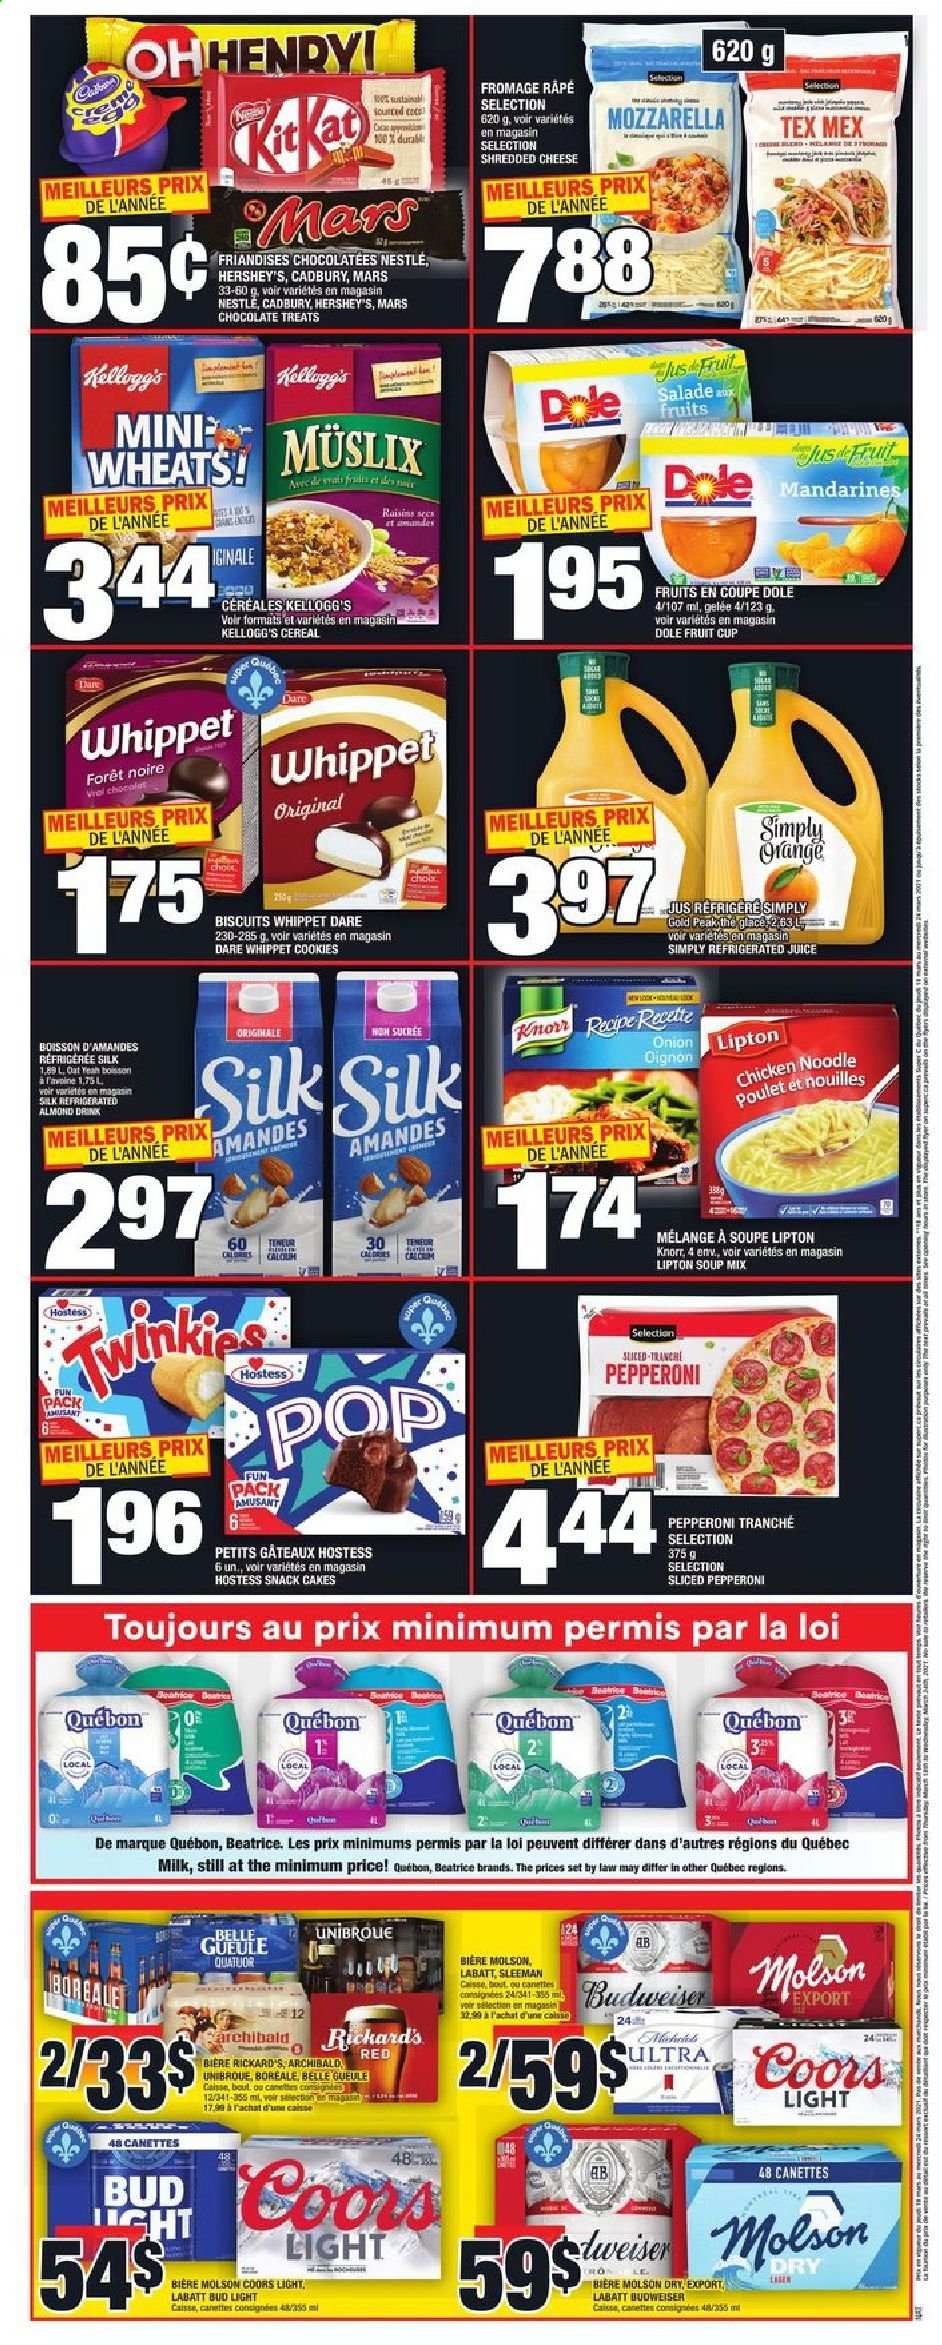 thumbnail - Super C Flyer - March 18, 2021 - March 24, 2021 - Sales products - cake, Dole, mandarines, soup mix, soup, noodles, pepperoni, shredded cheese, milk, Silk, Hershey's, cookies, chocolate, snack, Mars, Kellogg's, biscuit, Cadbury, oats, cereals, dried fruit, juice, beer, Budweiser, Coors, Bud Light, Knorr, Nestlé, mozzarella, raisins. Page 2.